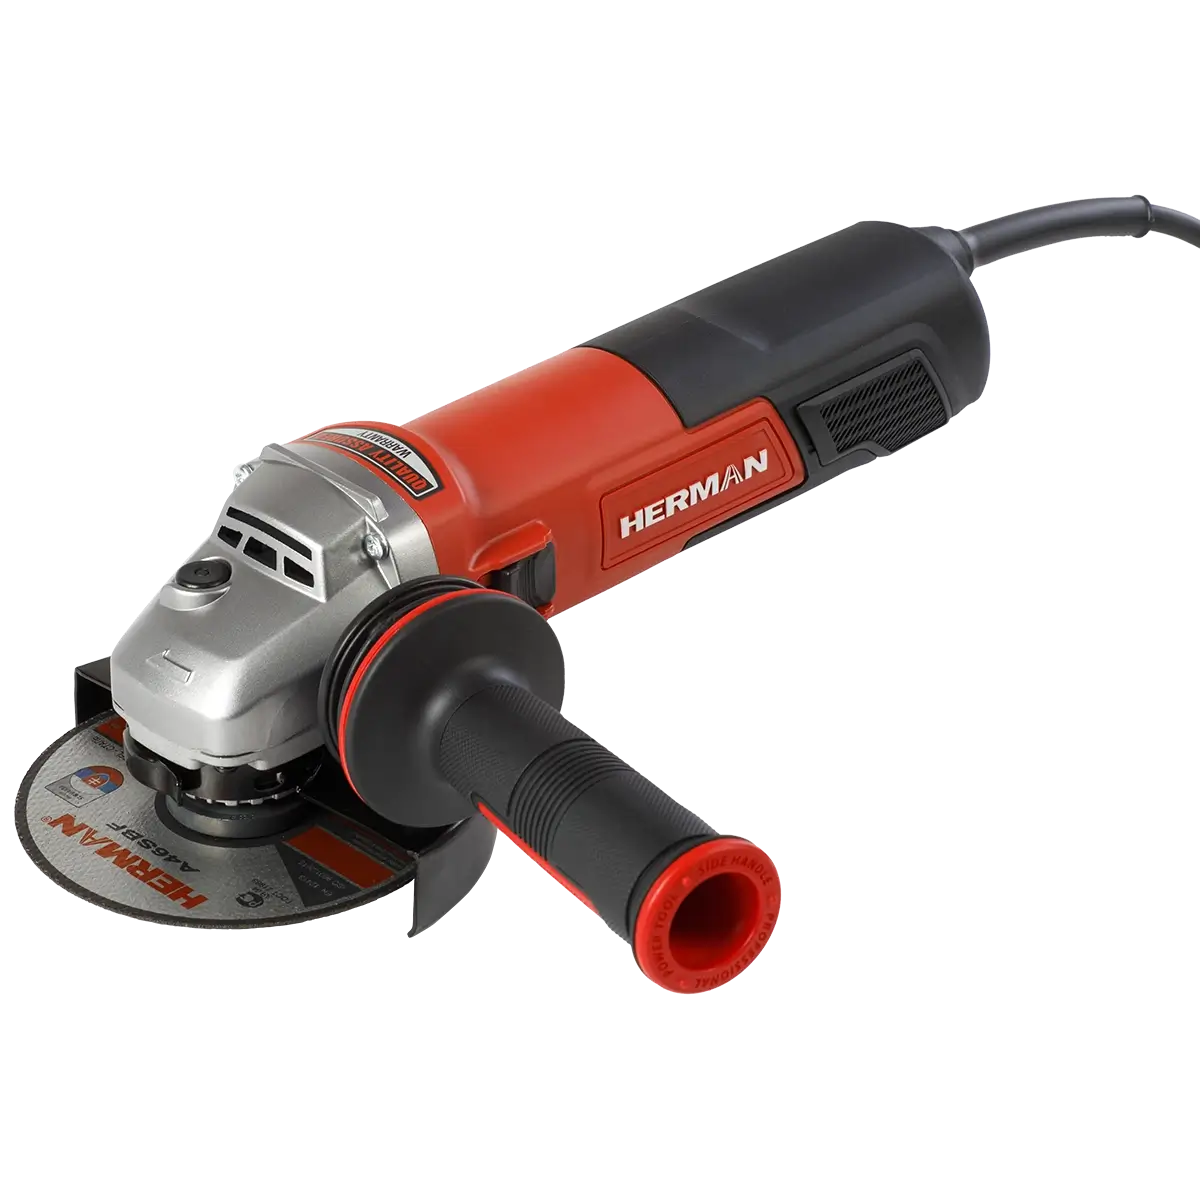 Angle Grinder HERMAN WX 12507 125 mm | 1500 W 11010003